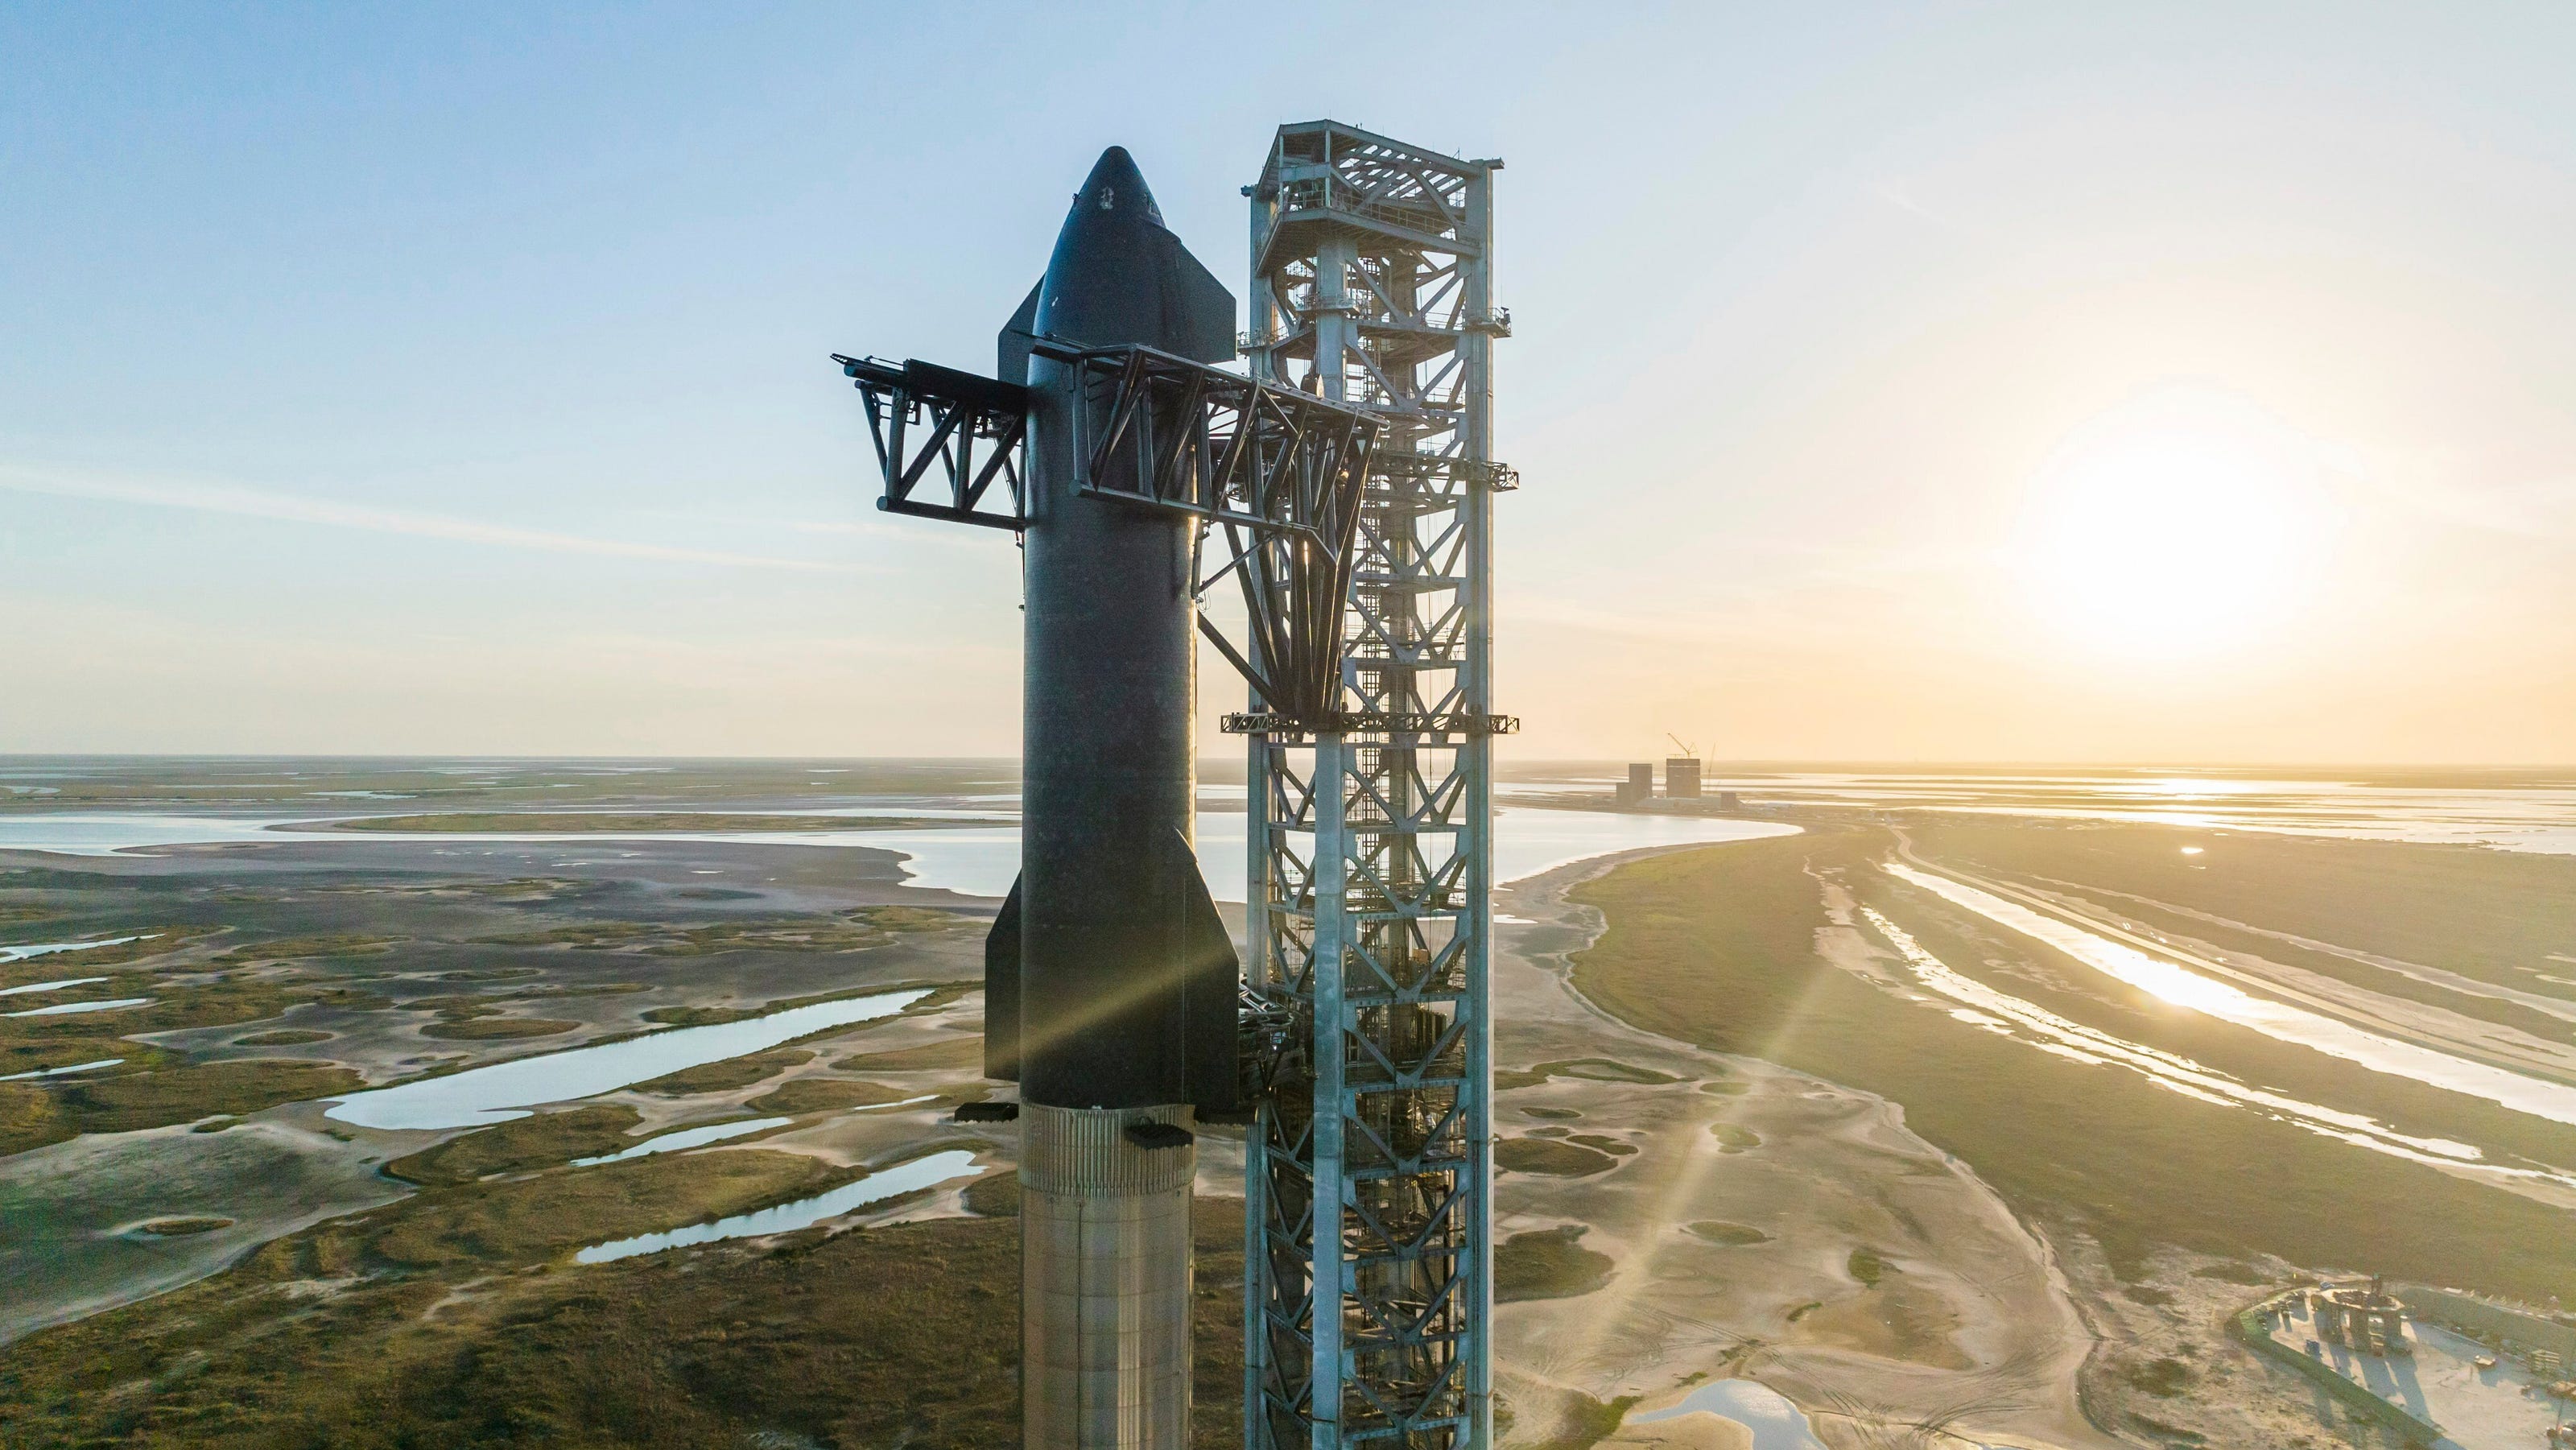 SpaceX closer to launching giant rocketship after FAA review